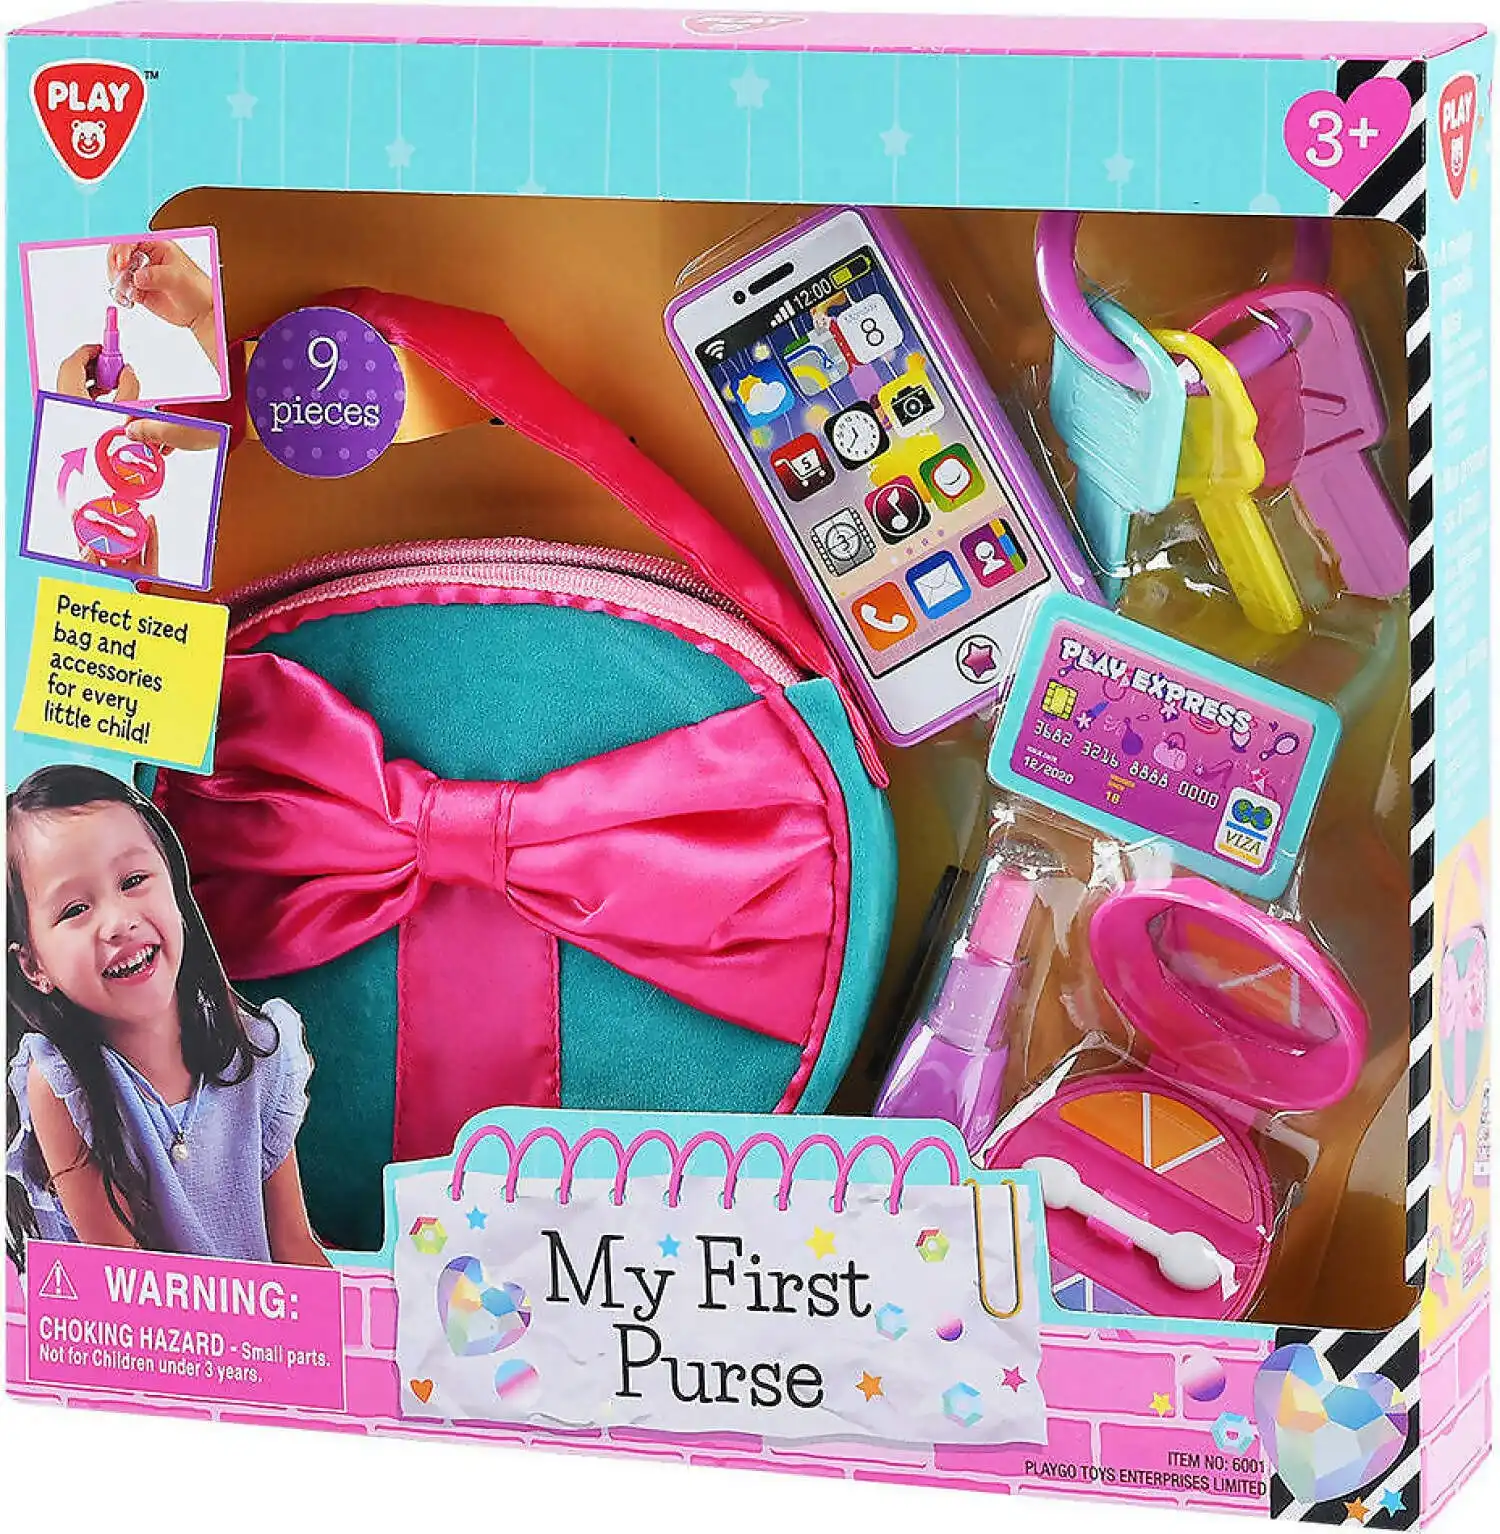 Playgo Toys Ent. Ltd. - My First Purse 9 Pieces